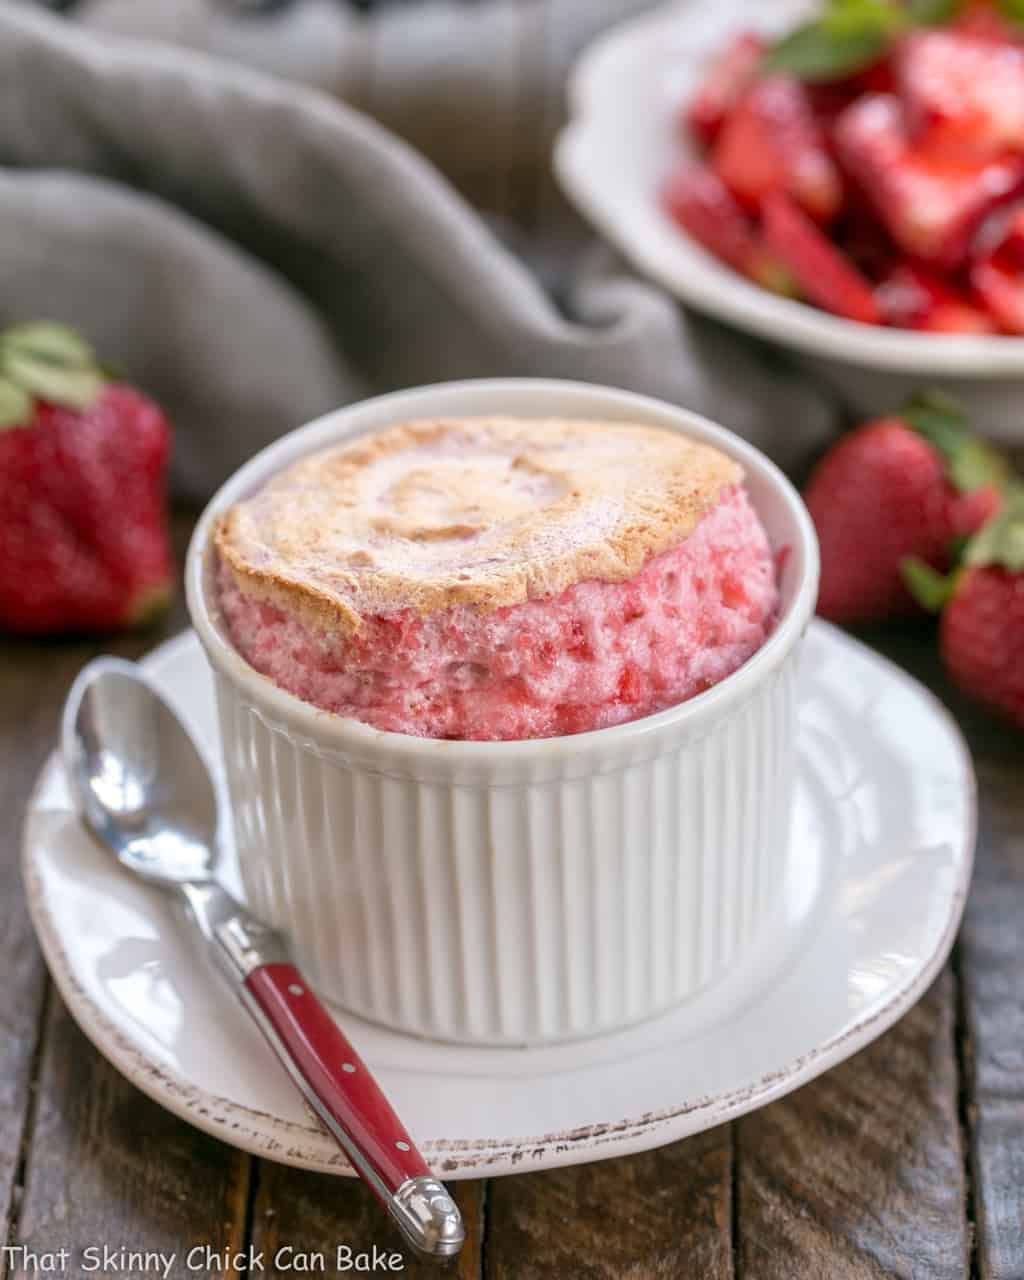 Strawberry Soufflé in a white ramekin with a red handled spoon.